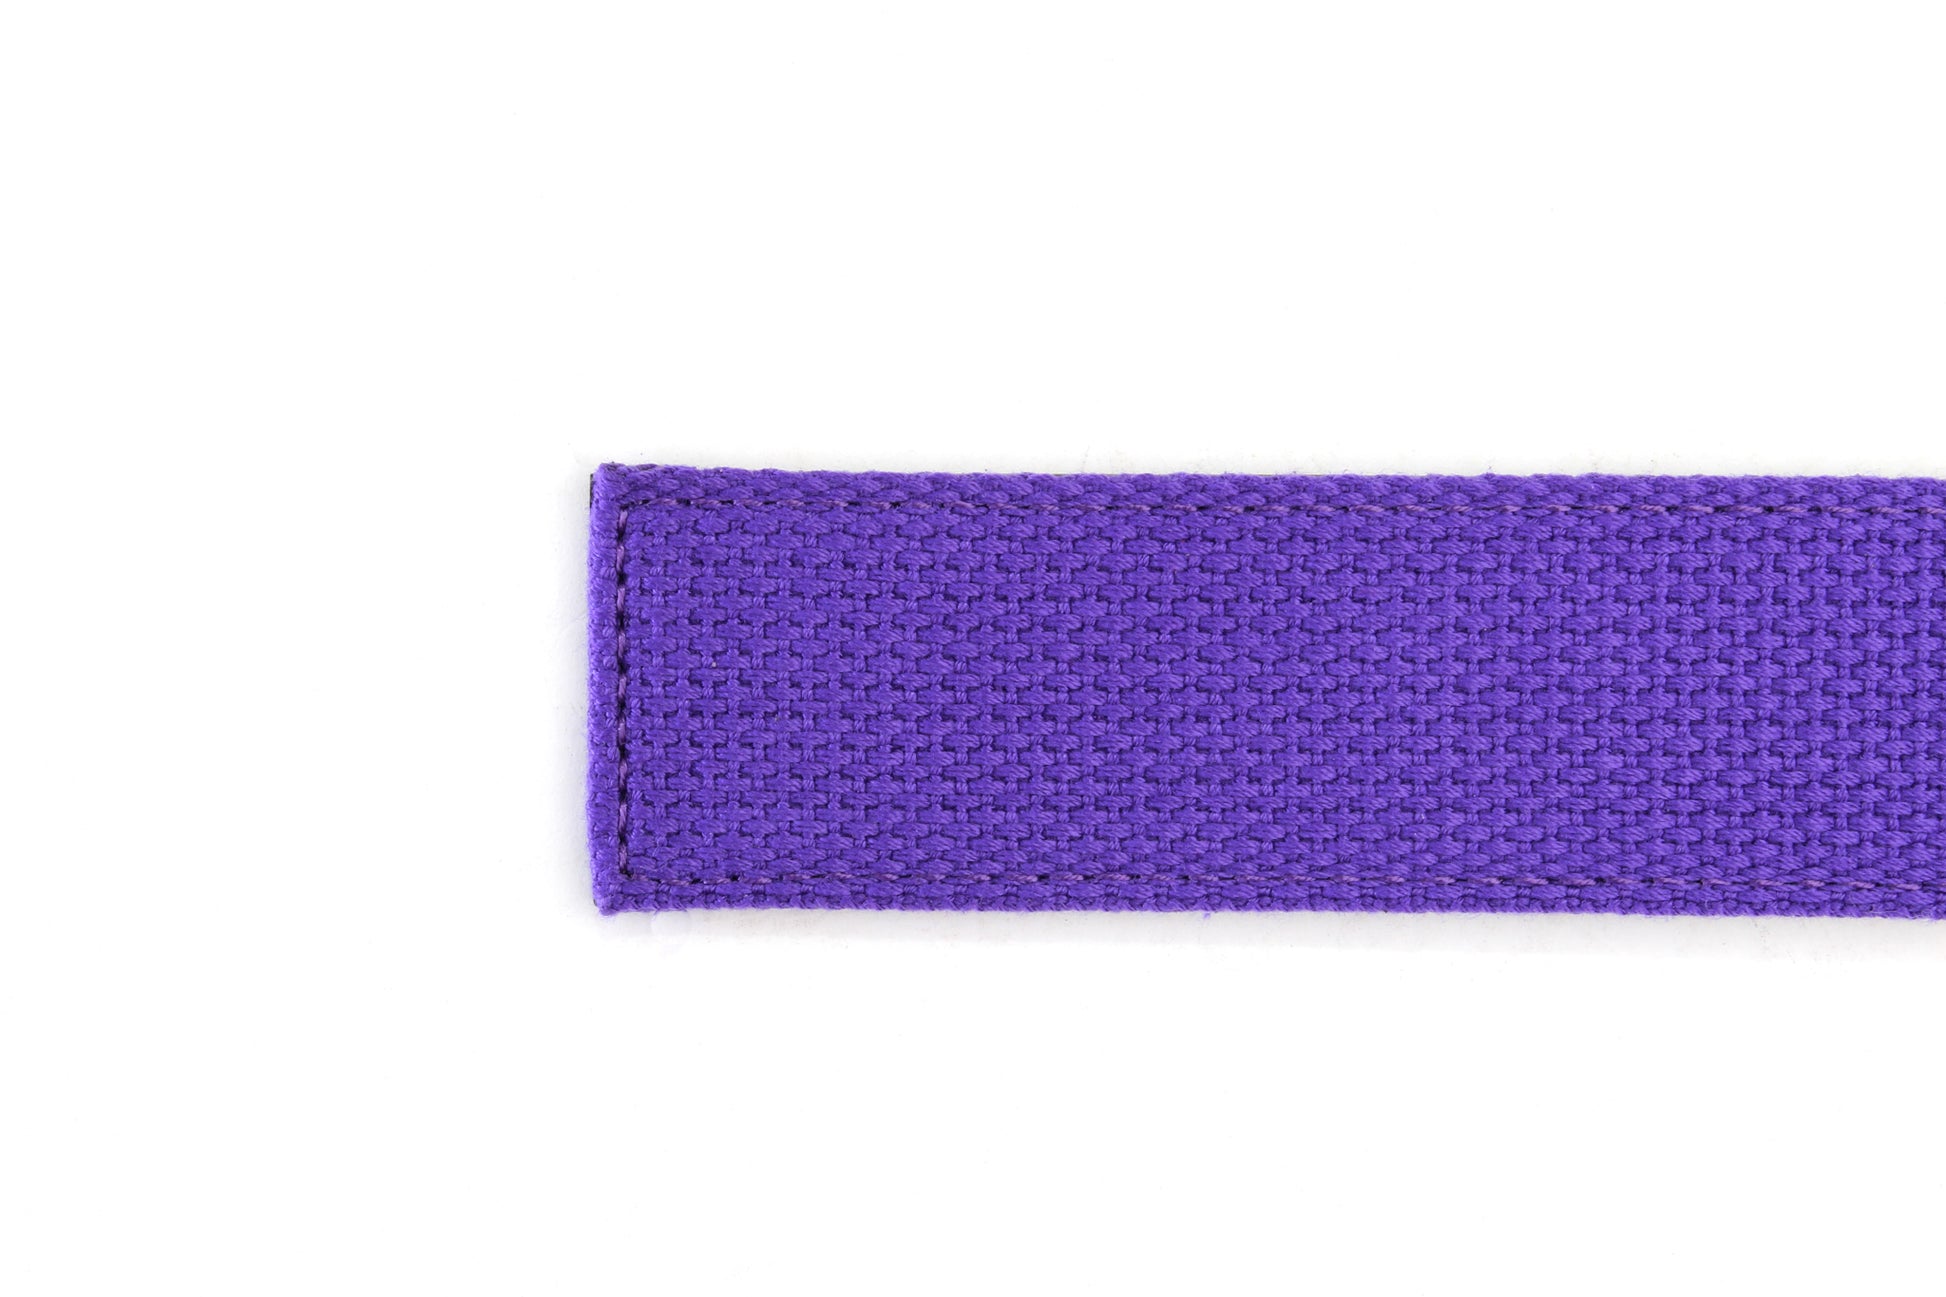 Men's canvas belt strap in purple, 1.5 inches wide, casual look, tip of the strap